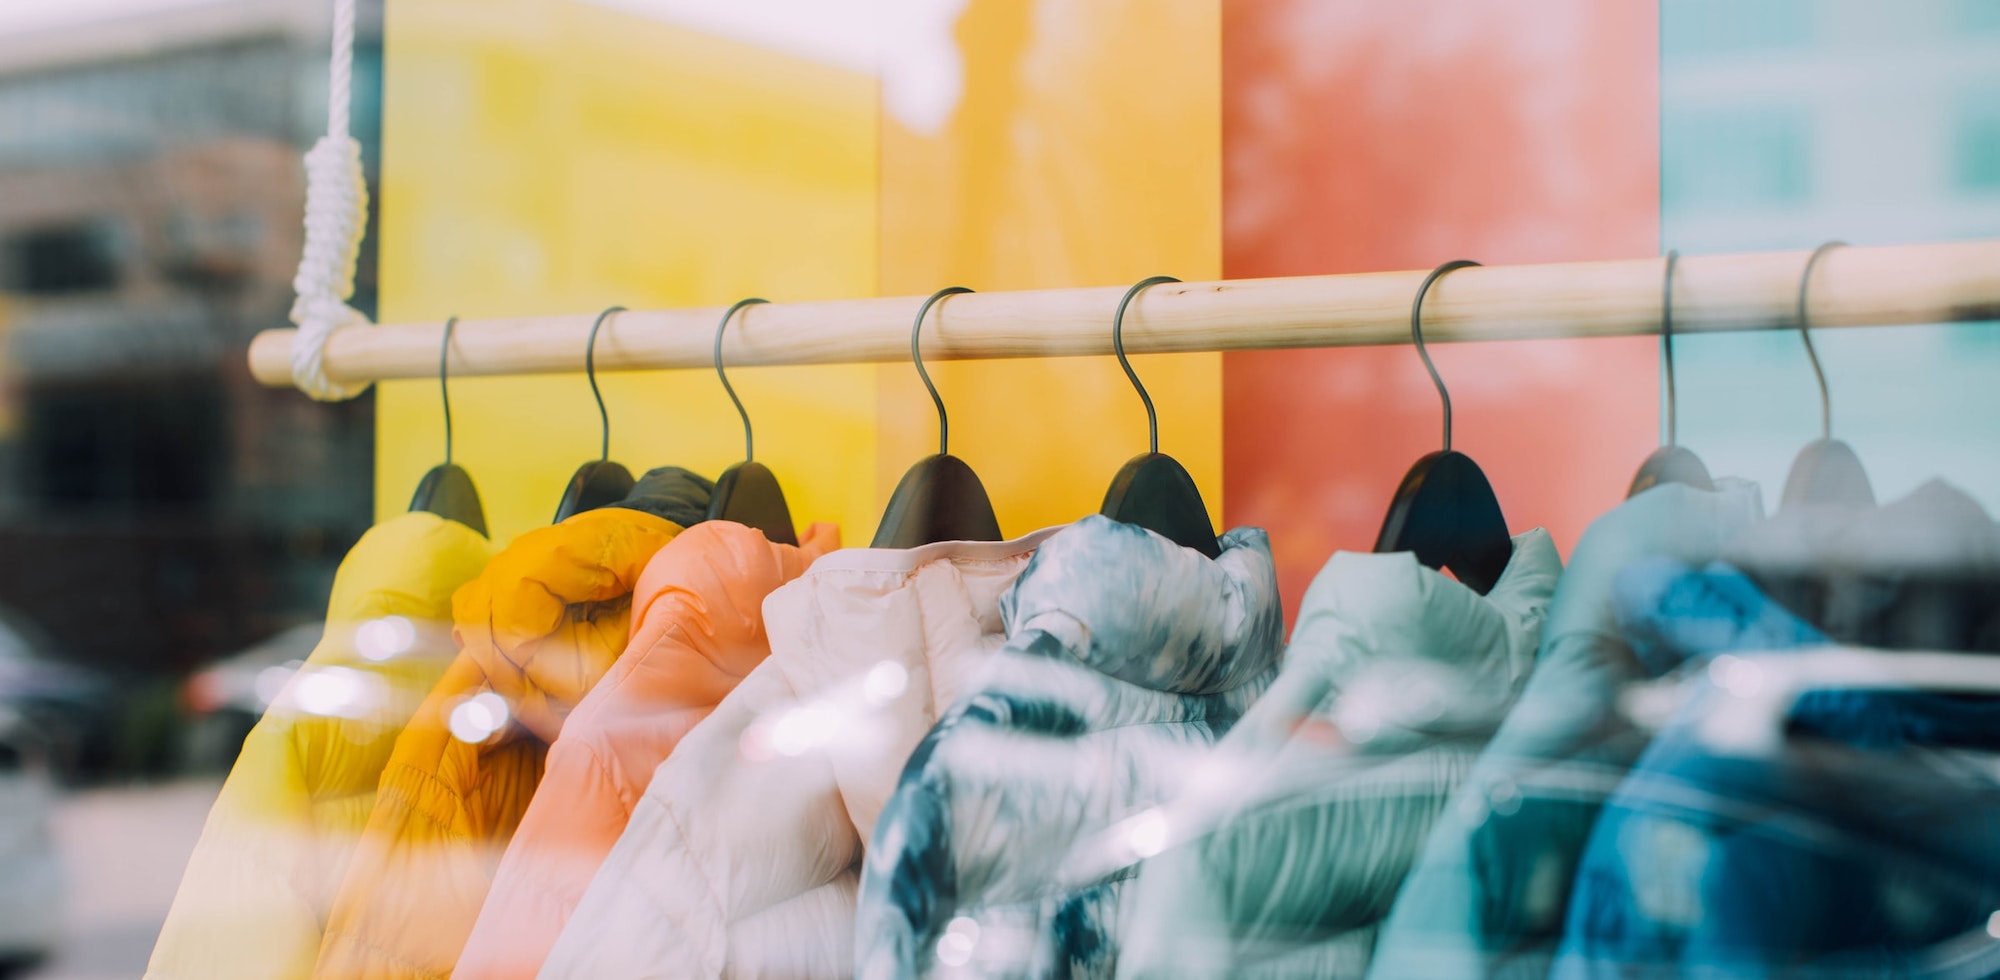 Bright coloured jackets on a rack